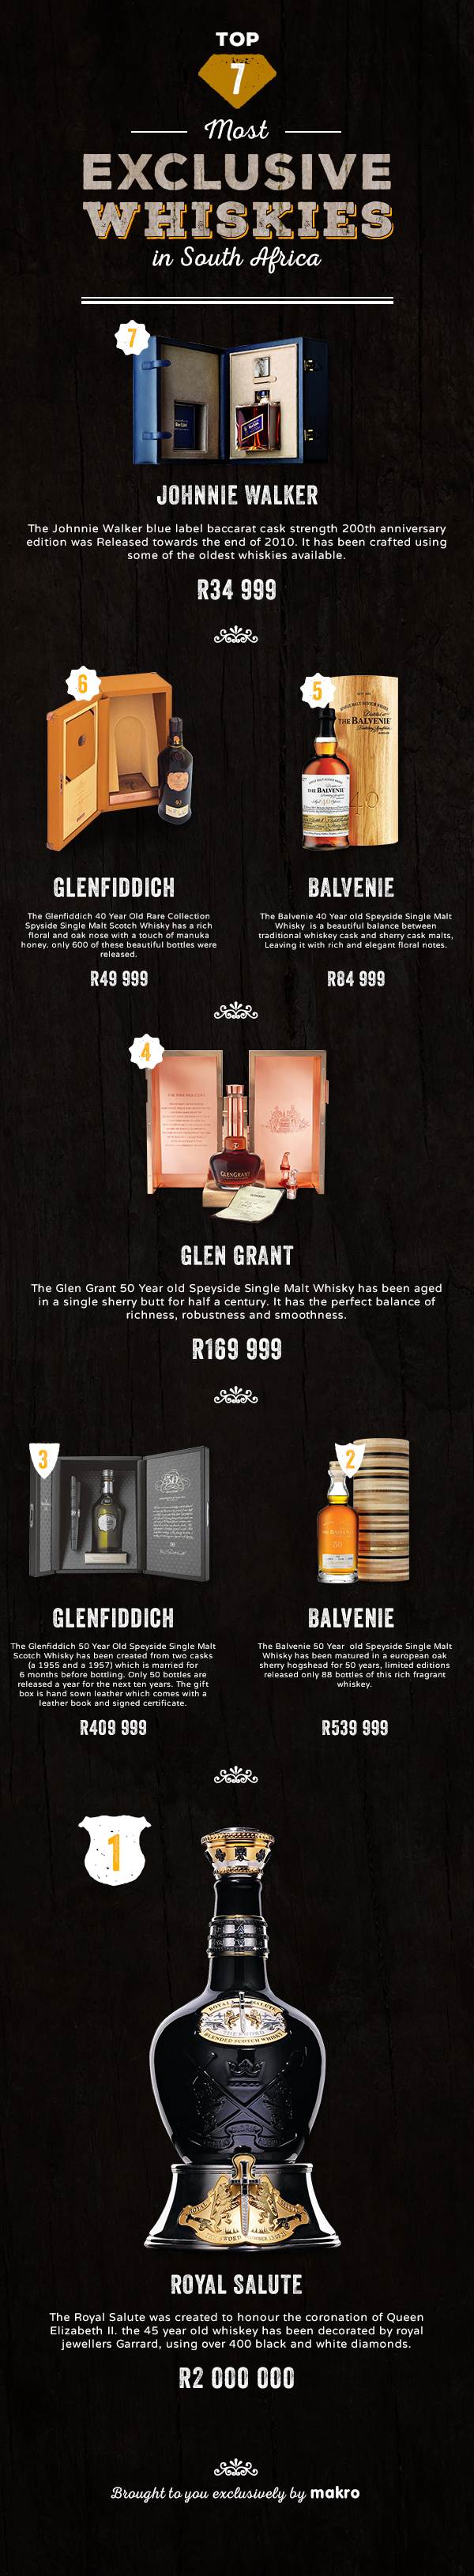 Exclusive Whiskies in South Africa